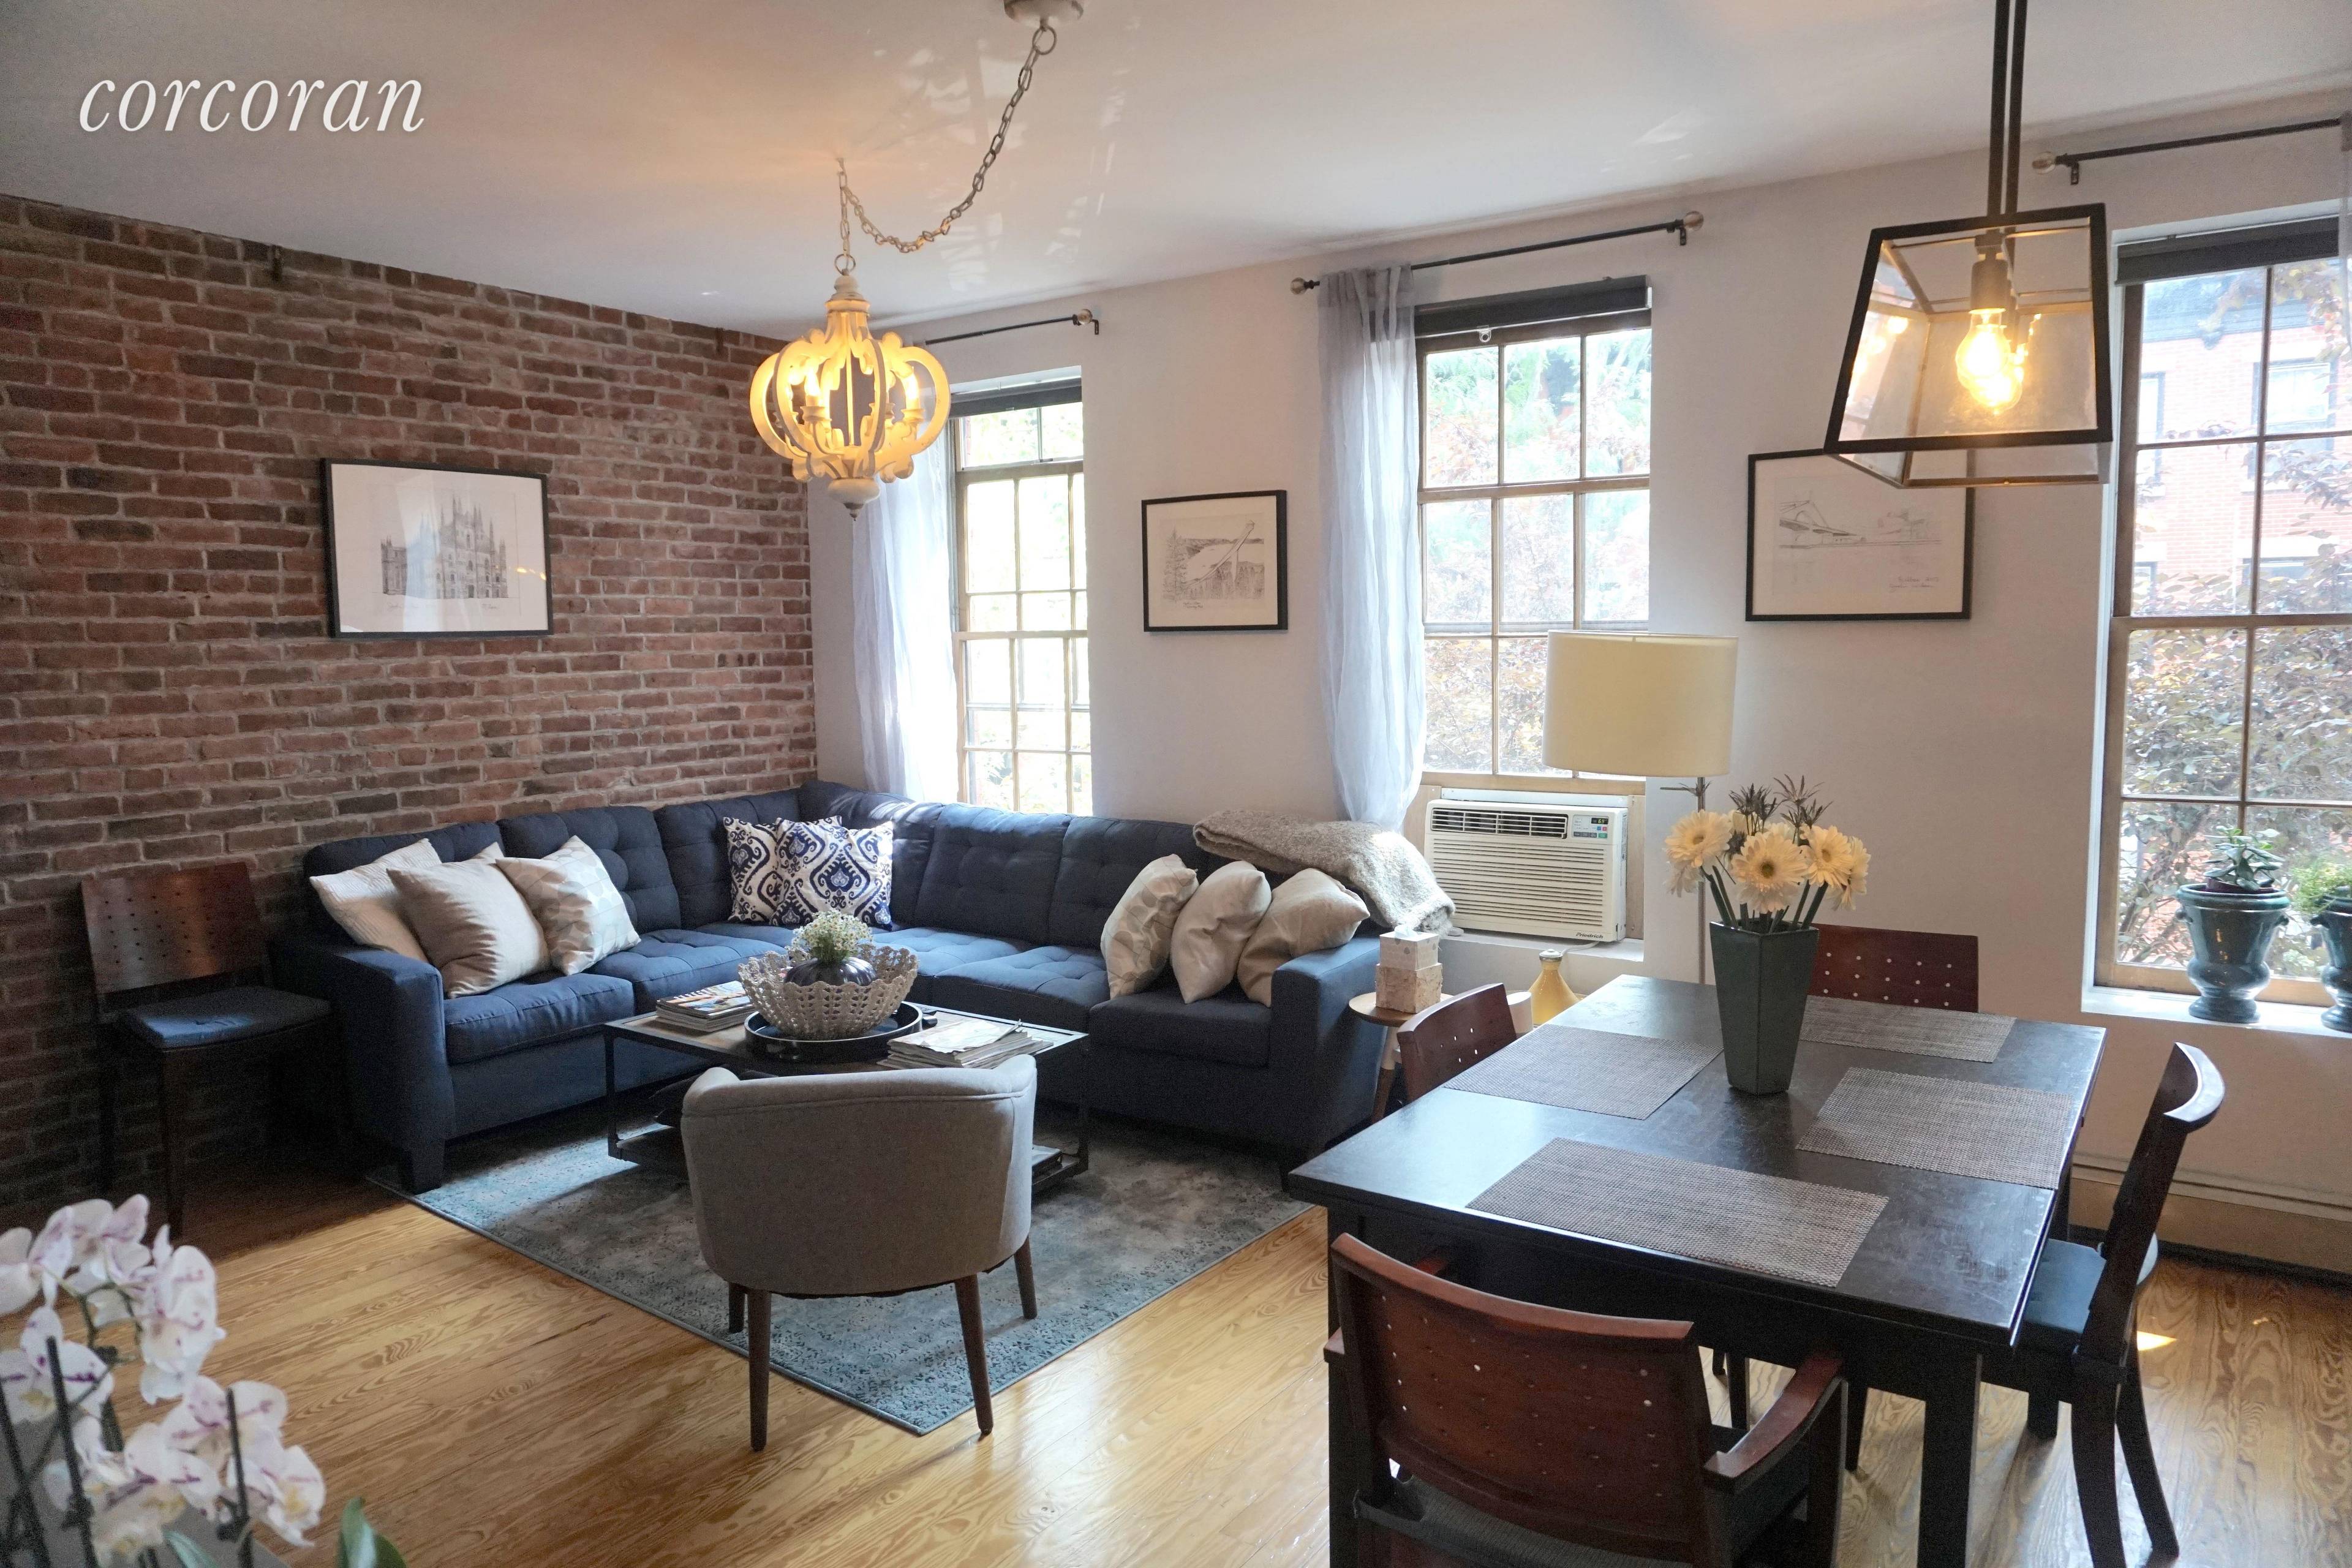 3 Beds 3 Floors 3 Patios 1 Chic HomeOn a picture perfect, tree lined block in the middle of prime Boerum Hill, you will find 'The Bergen Townhouse'.